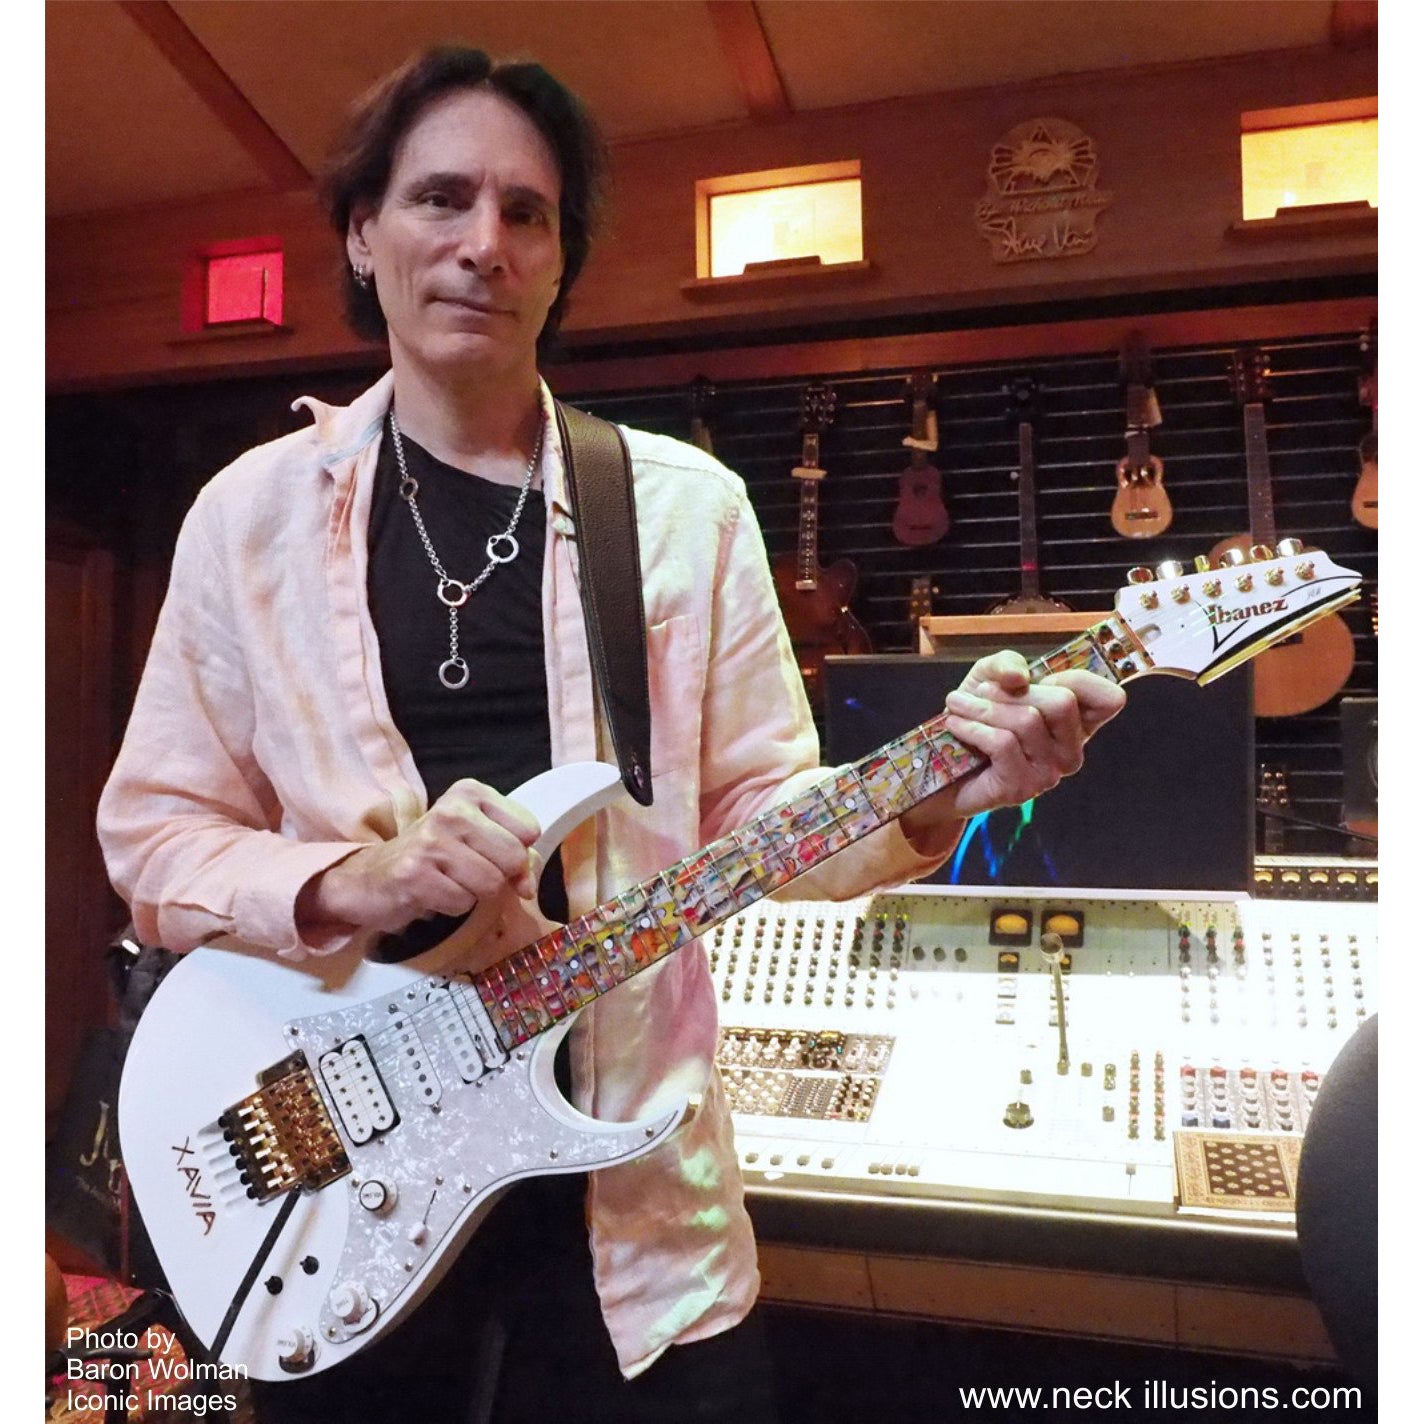 Image of steve vai in the recording studio holding a white electric guitar with a colorful fret protector on the neck of the guitar.